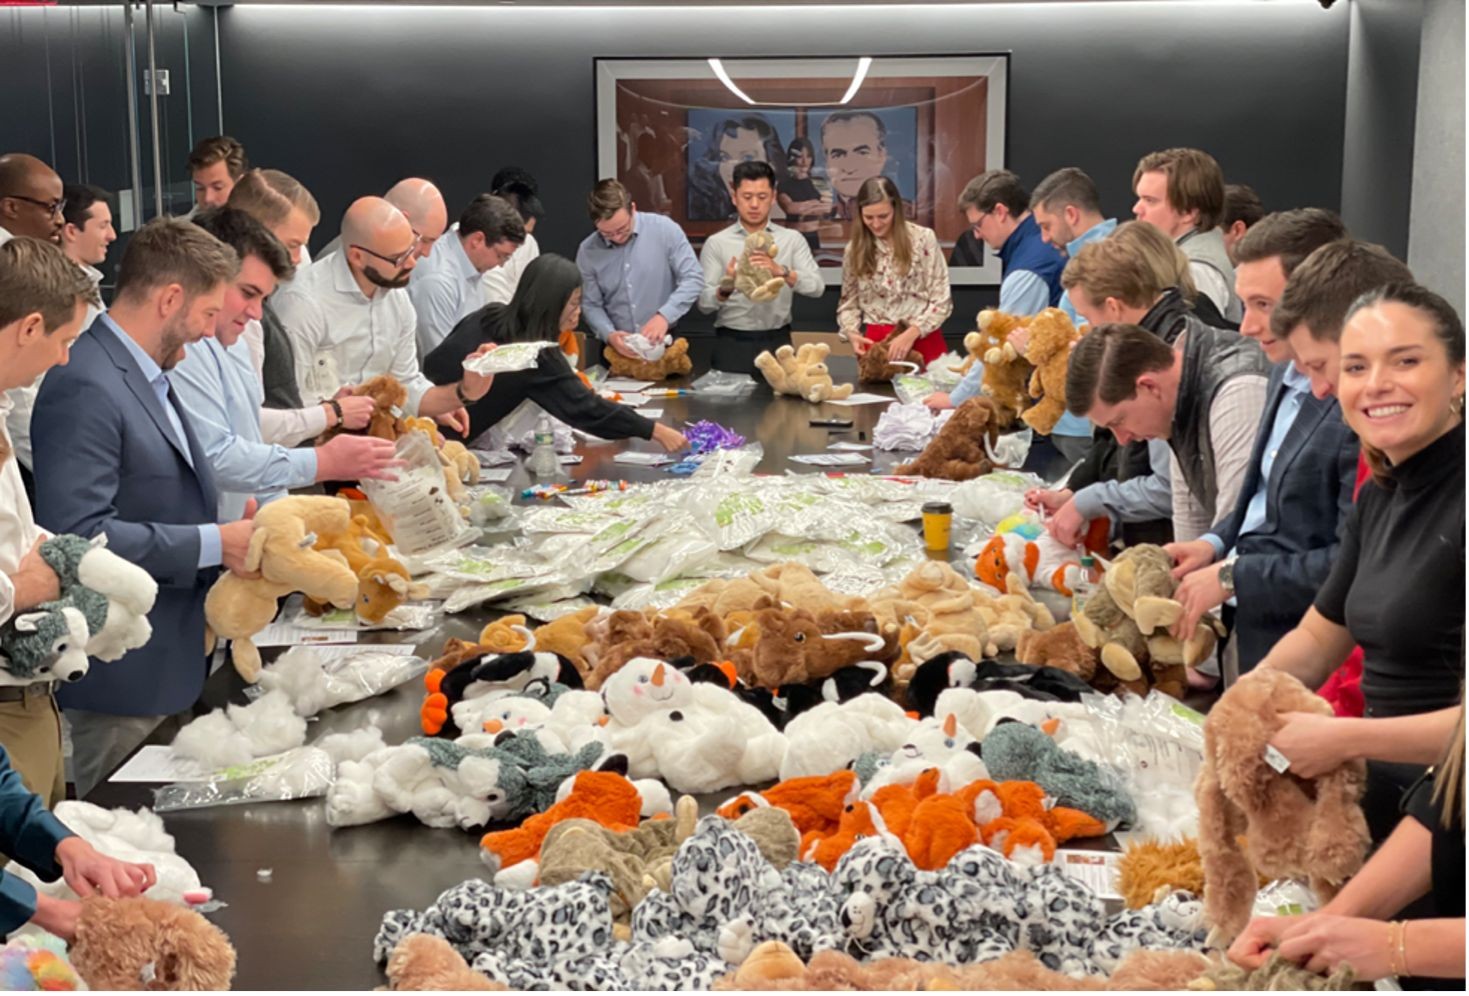 We made 150 stuffed animals with love for kids in hospitals, foster care, and shelters